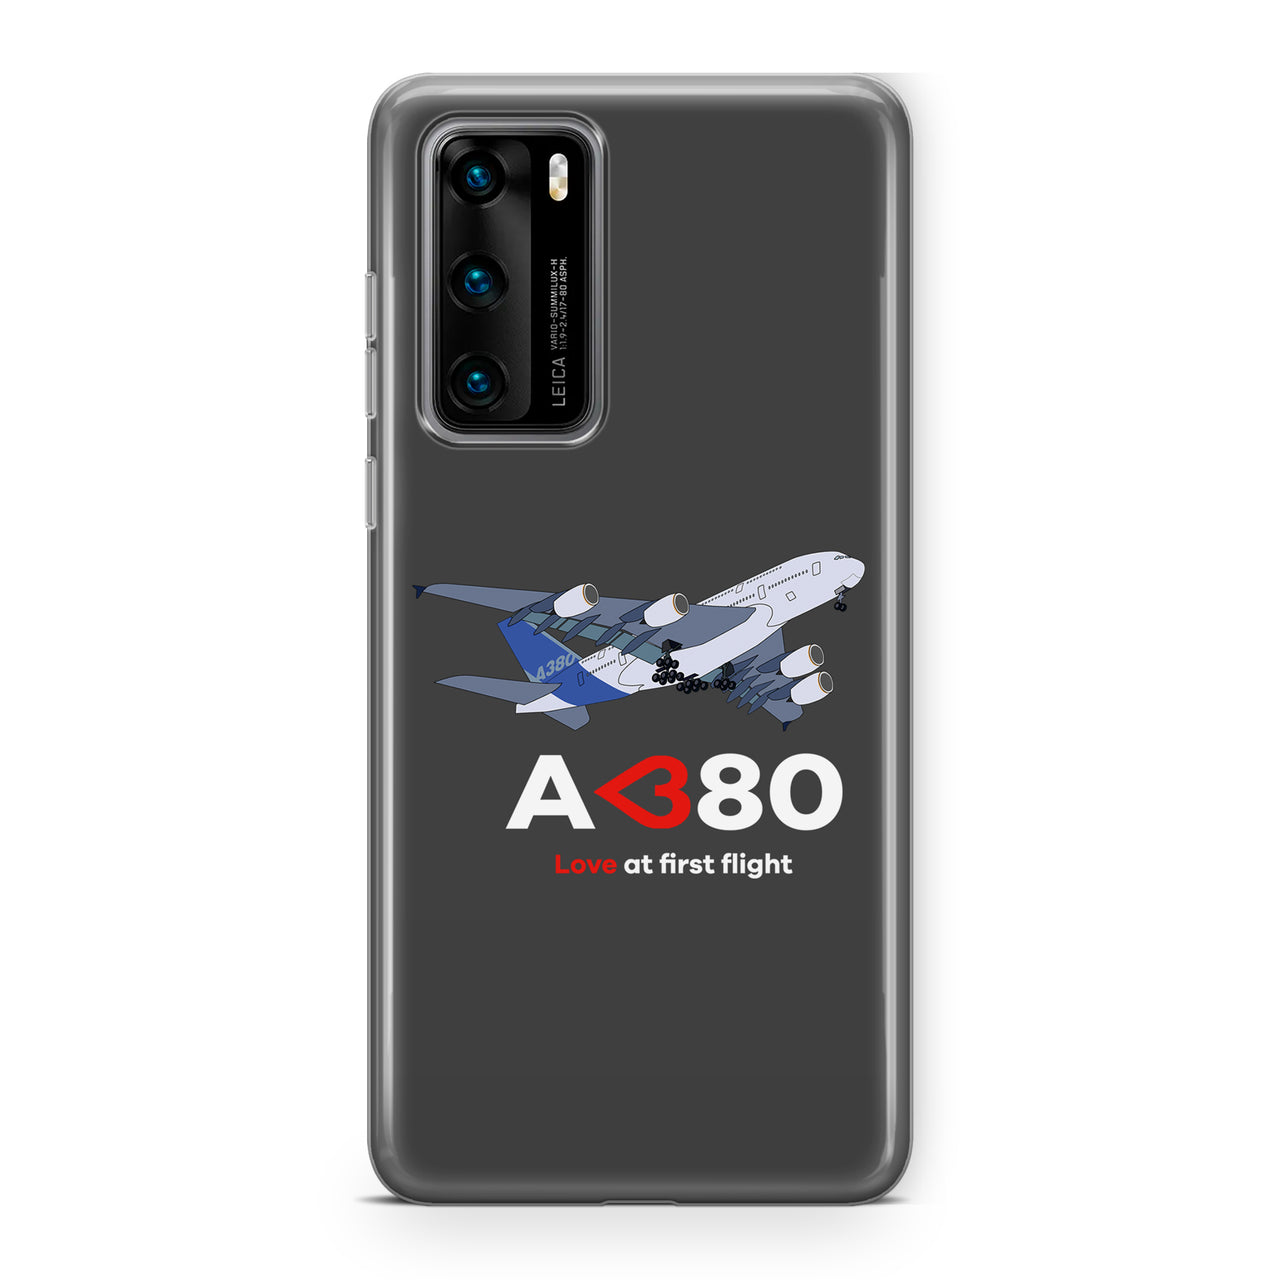 Airbus A380 Love at first flight Designed Huawei Cases